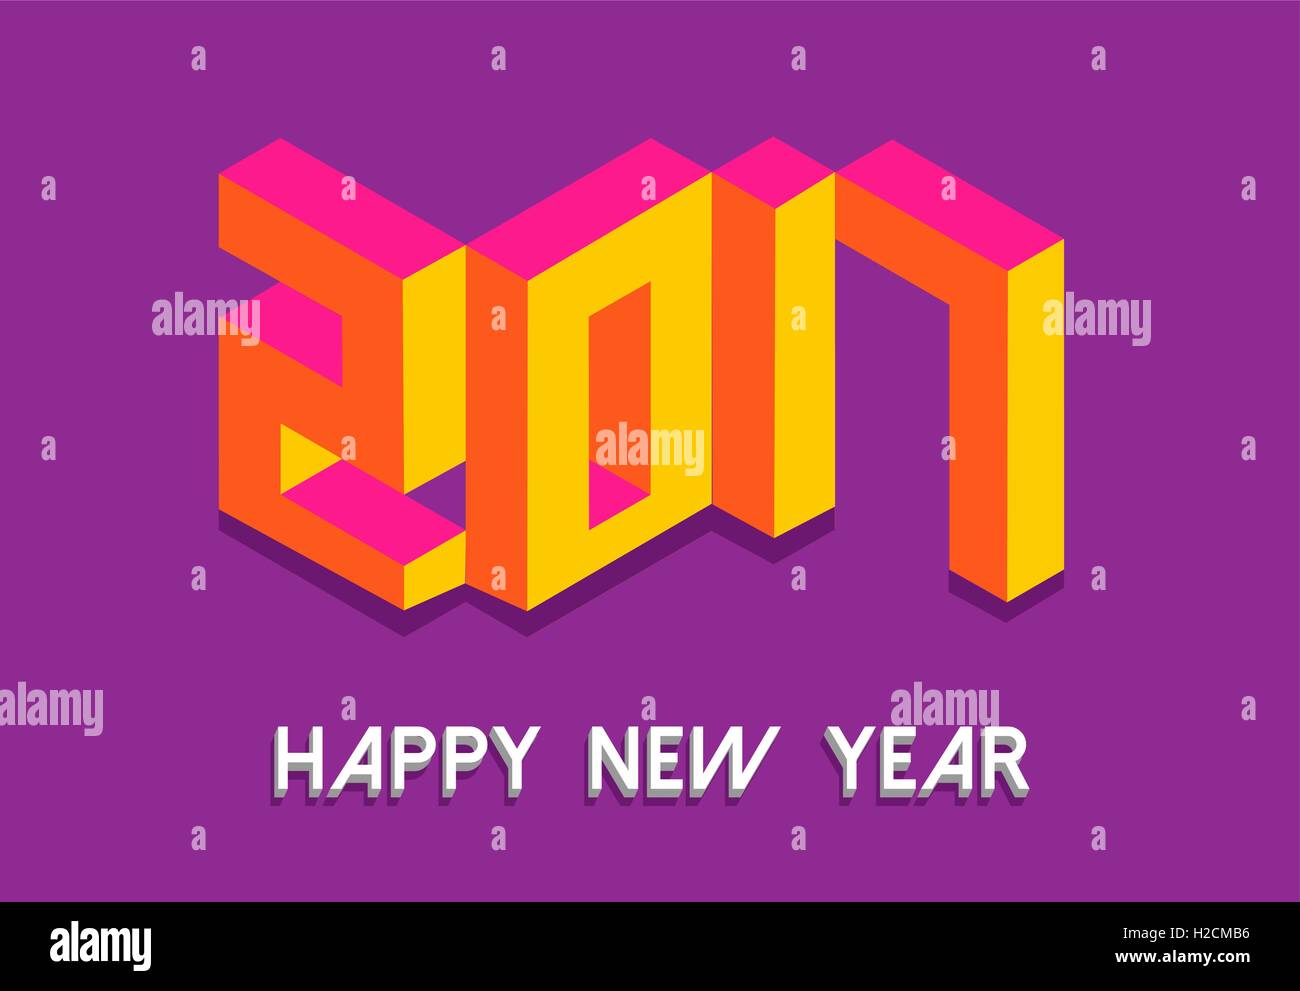 Happy New Year 2017 retro greeting card design with colorful geometric isometric text. EPS10 vector. Stock Vector